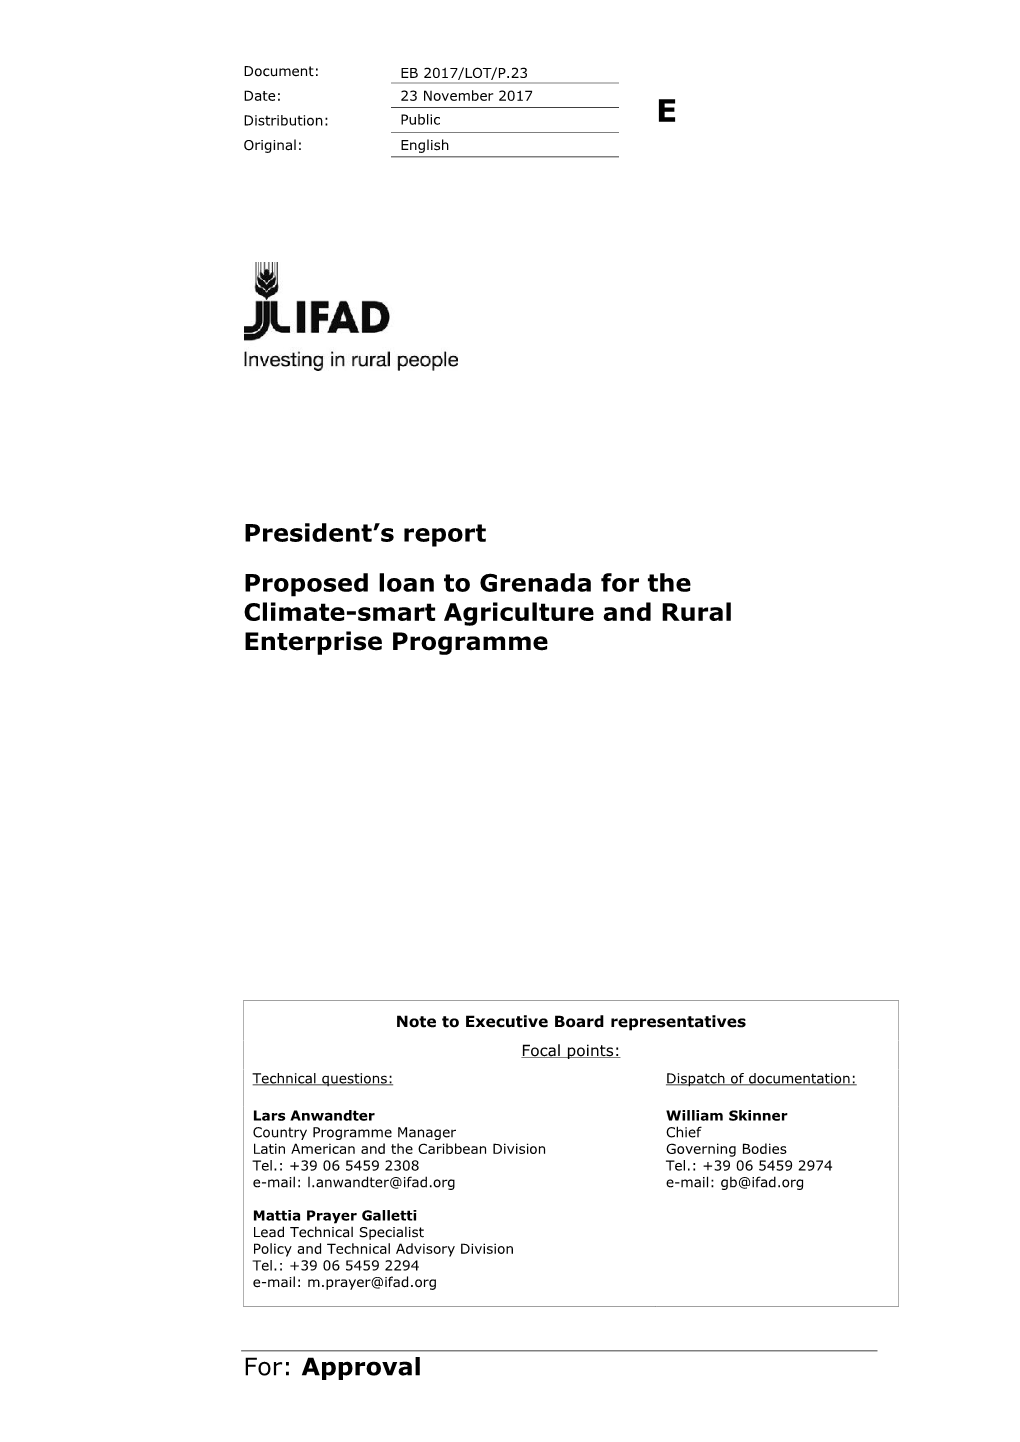 For: Approval President's Report Proposed Loan to Grenada for The